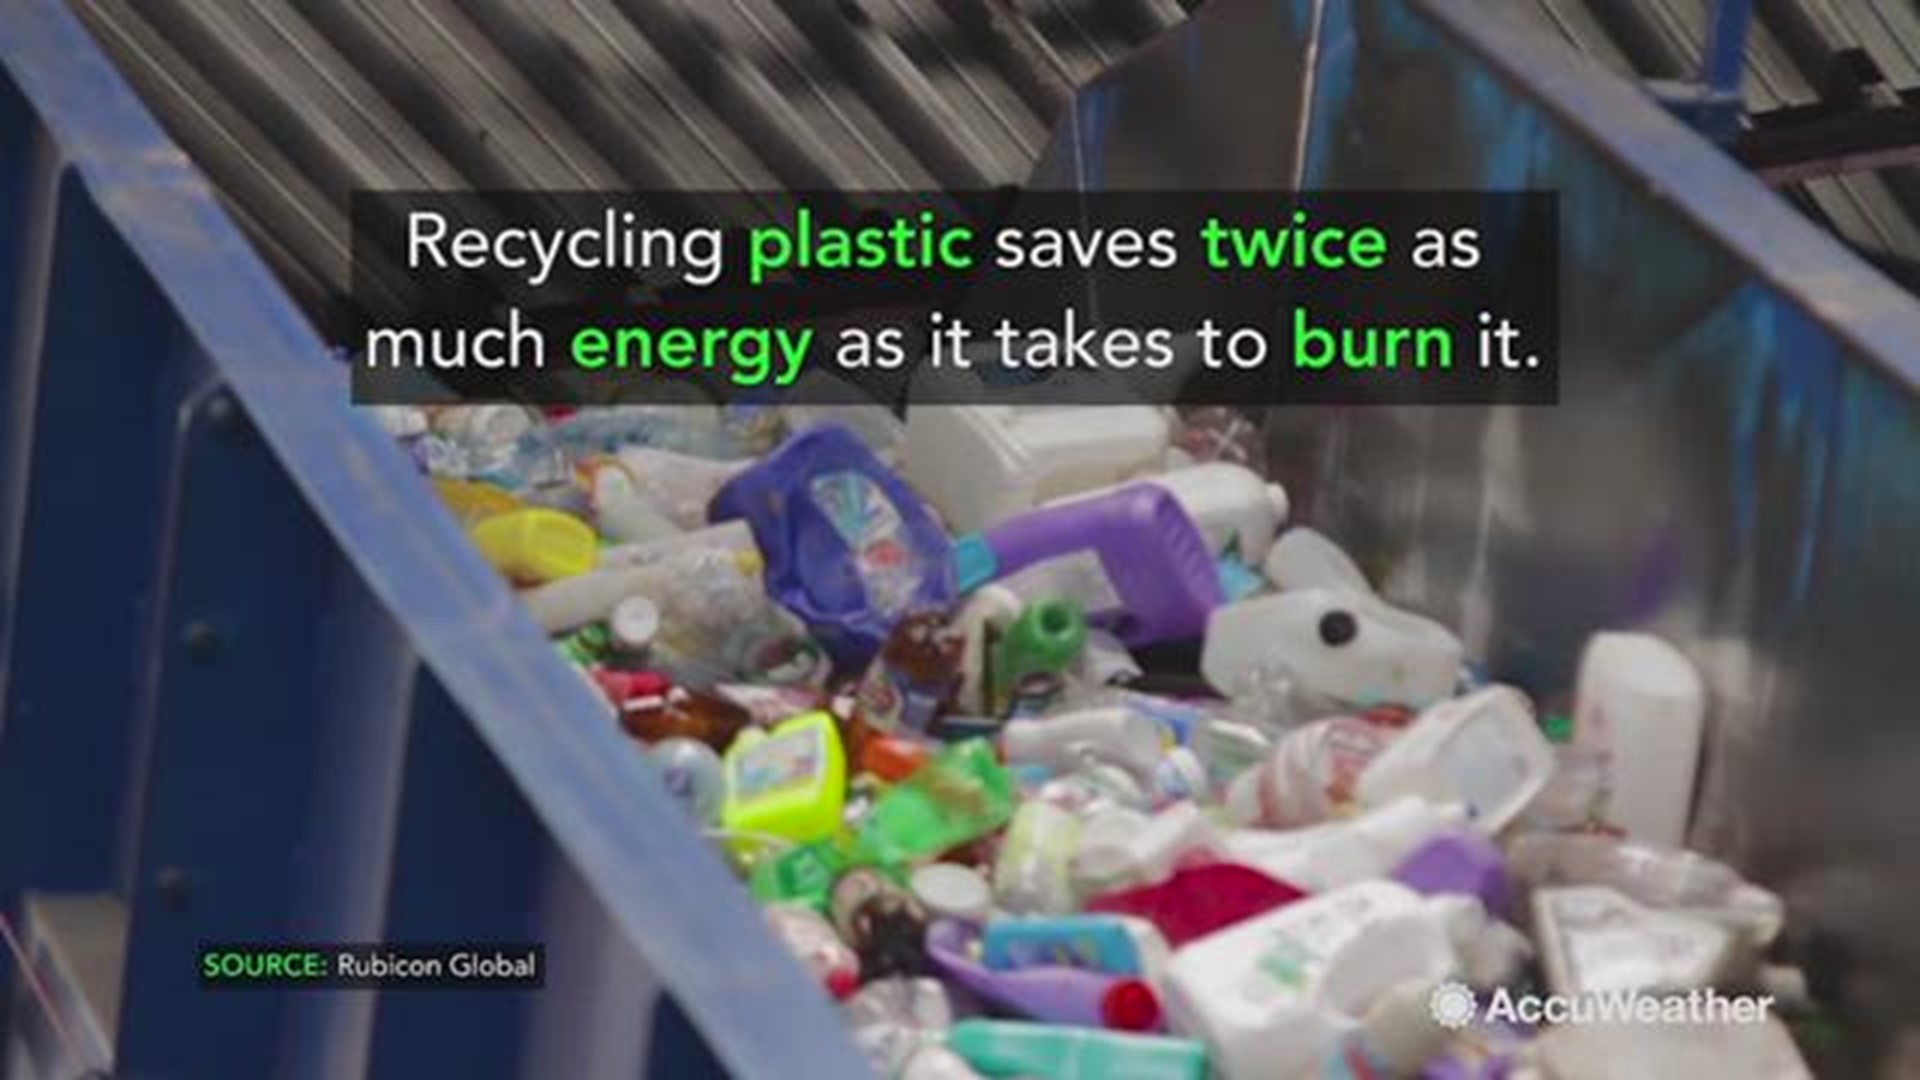 Did you know that a single recycled plastic bottle saves enough energy to run a 100-watt bulb for four hours?